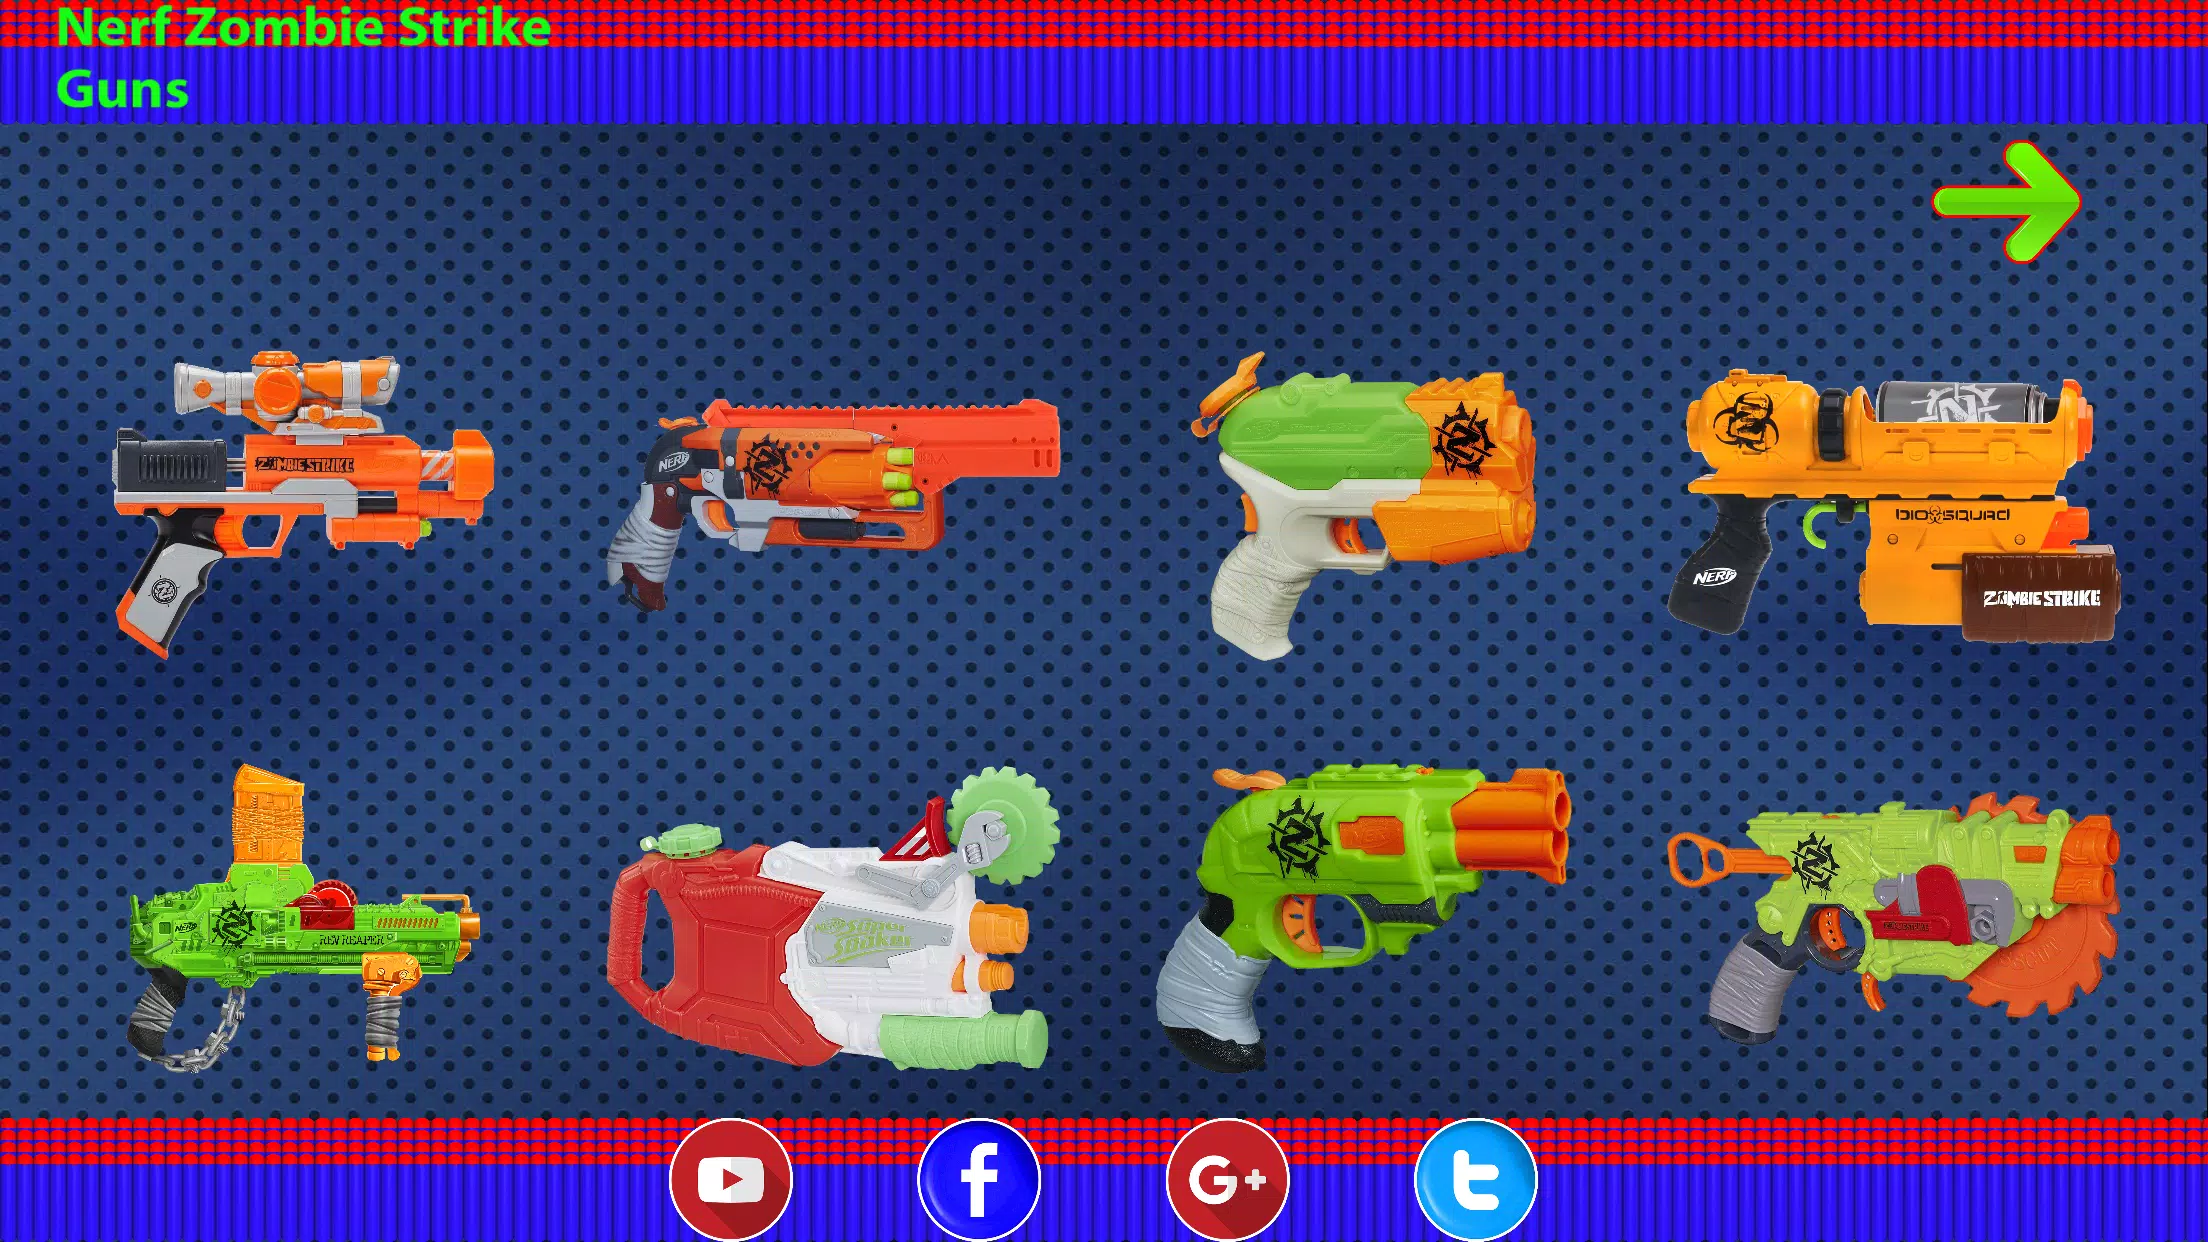 Nerf Zombie Strike Guns for Android - APK Download